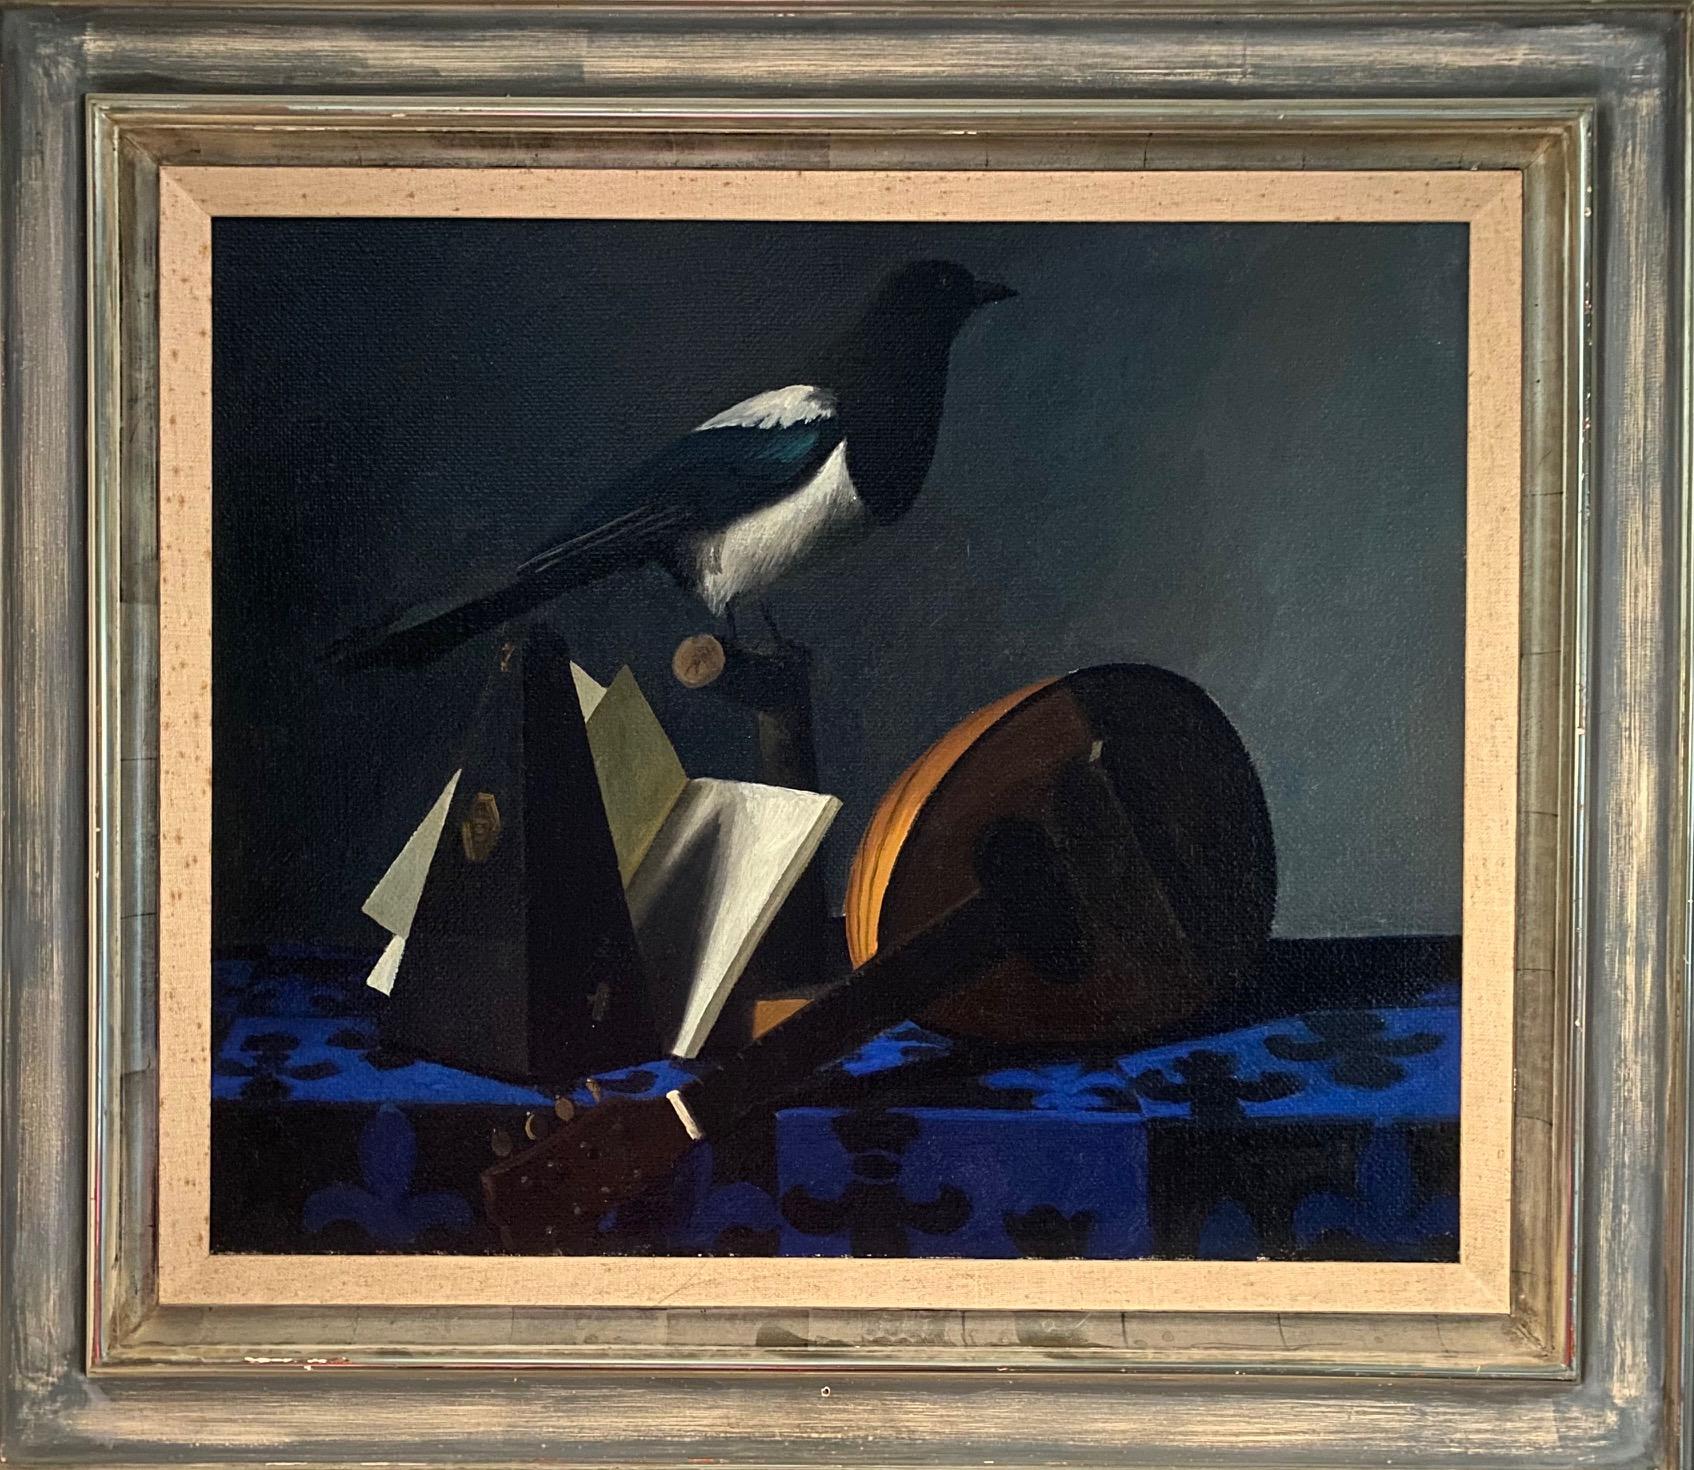 Magpie, mandolin and book by Jean Roll - Oil on canvas 54x65 cm 1